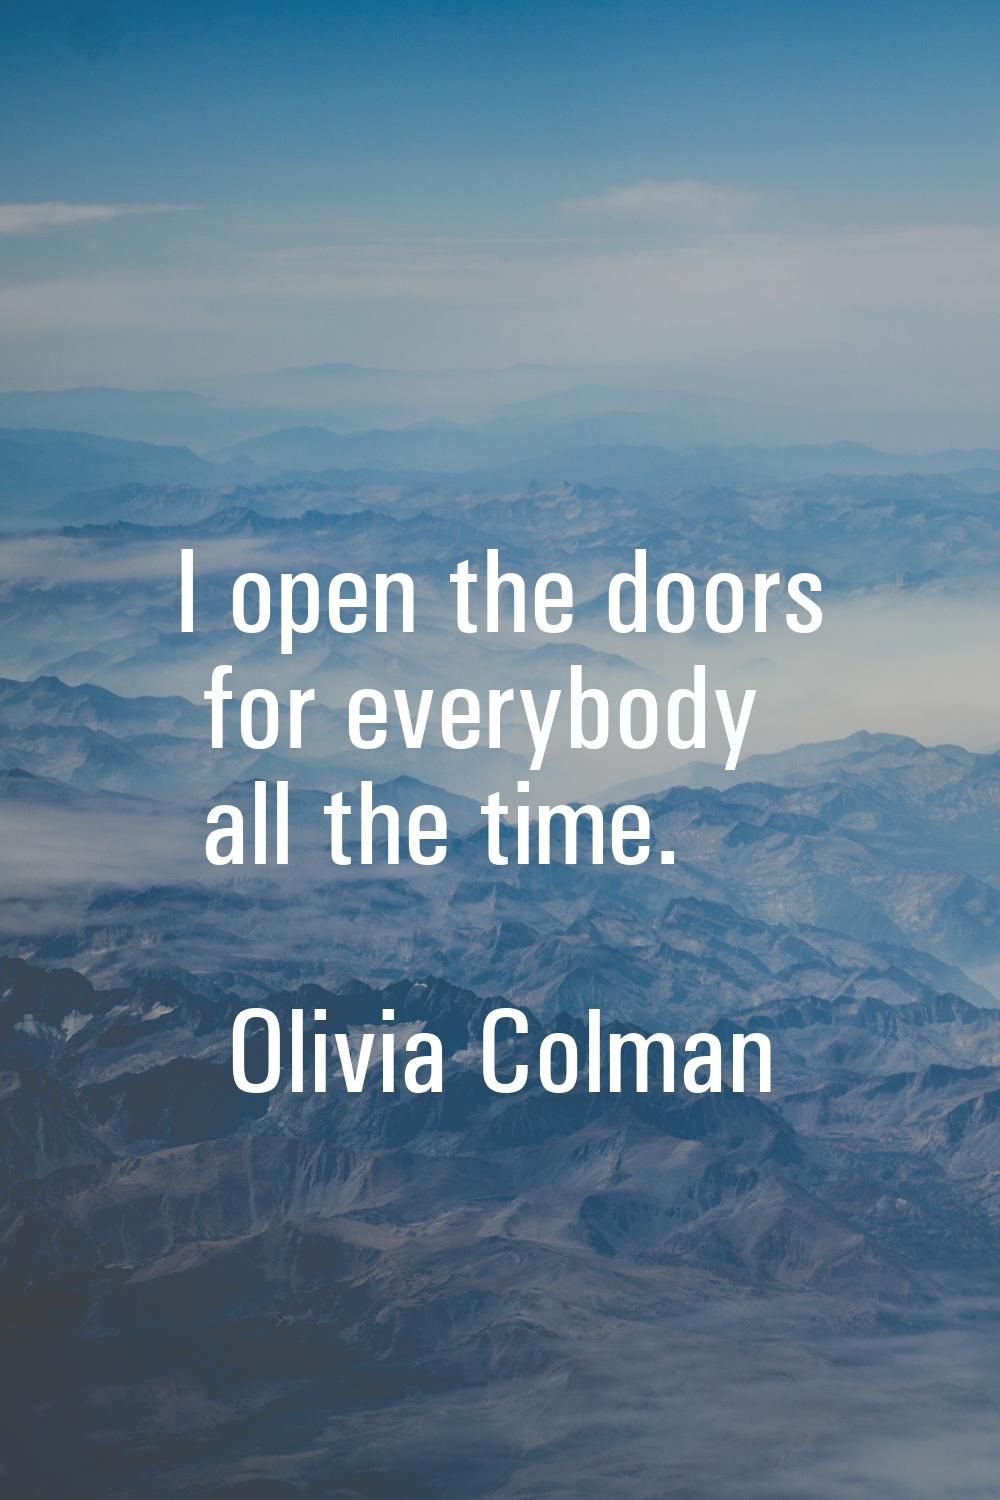 I open the doors for everybody all the time.